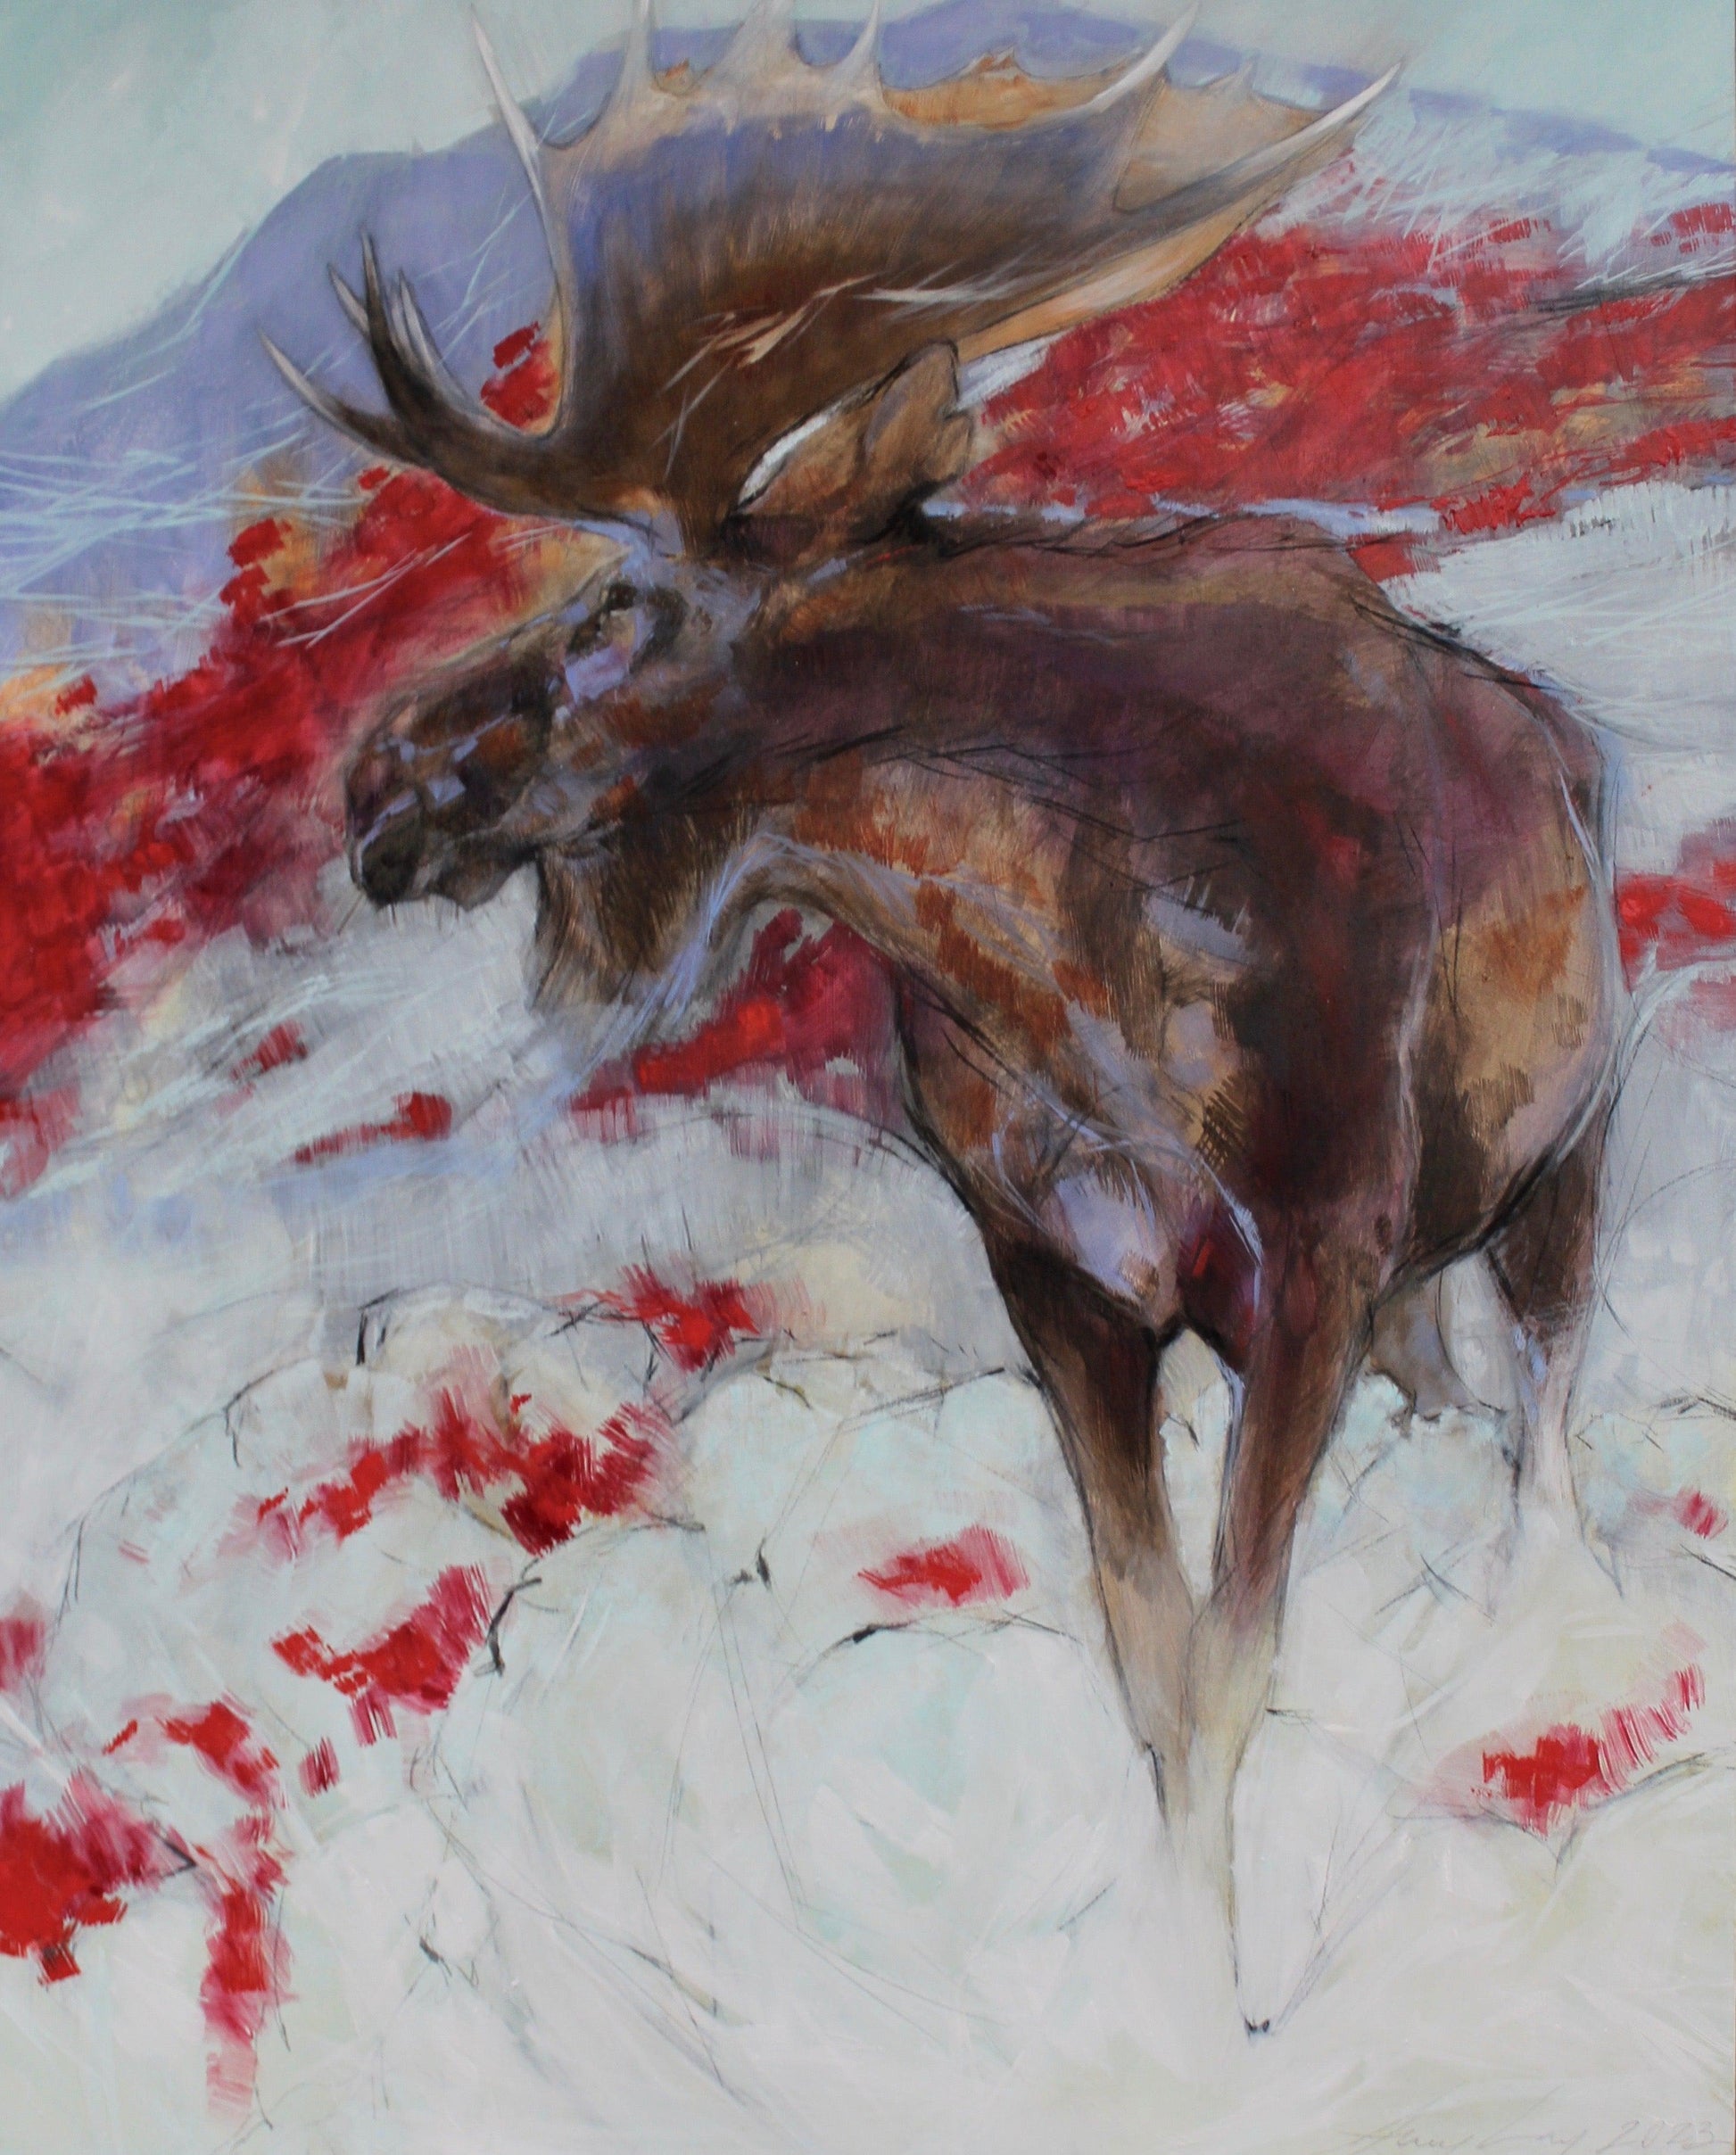 Scarlet Monarch-Painting-Amy Lay-Sorrel Sky Gallery